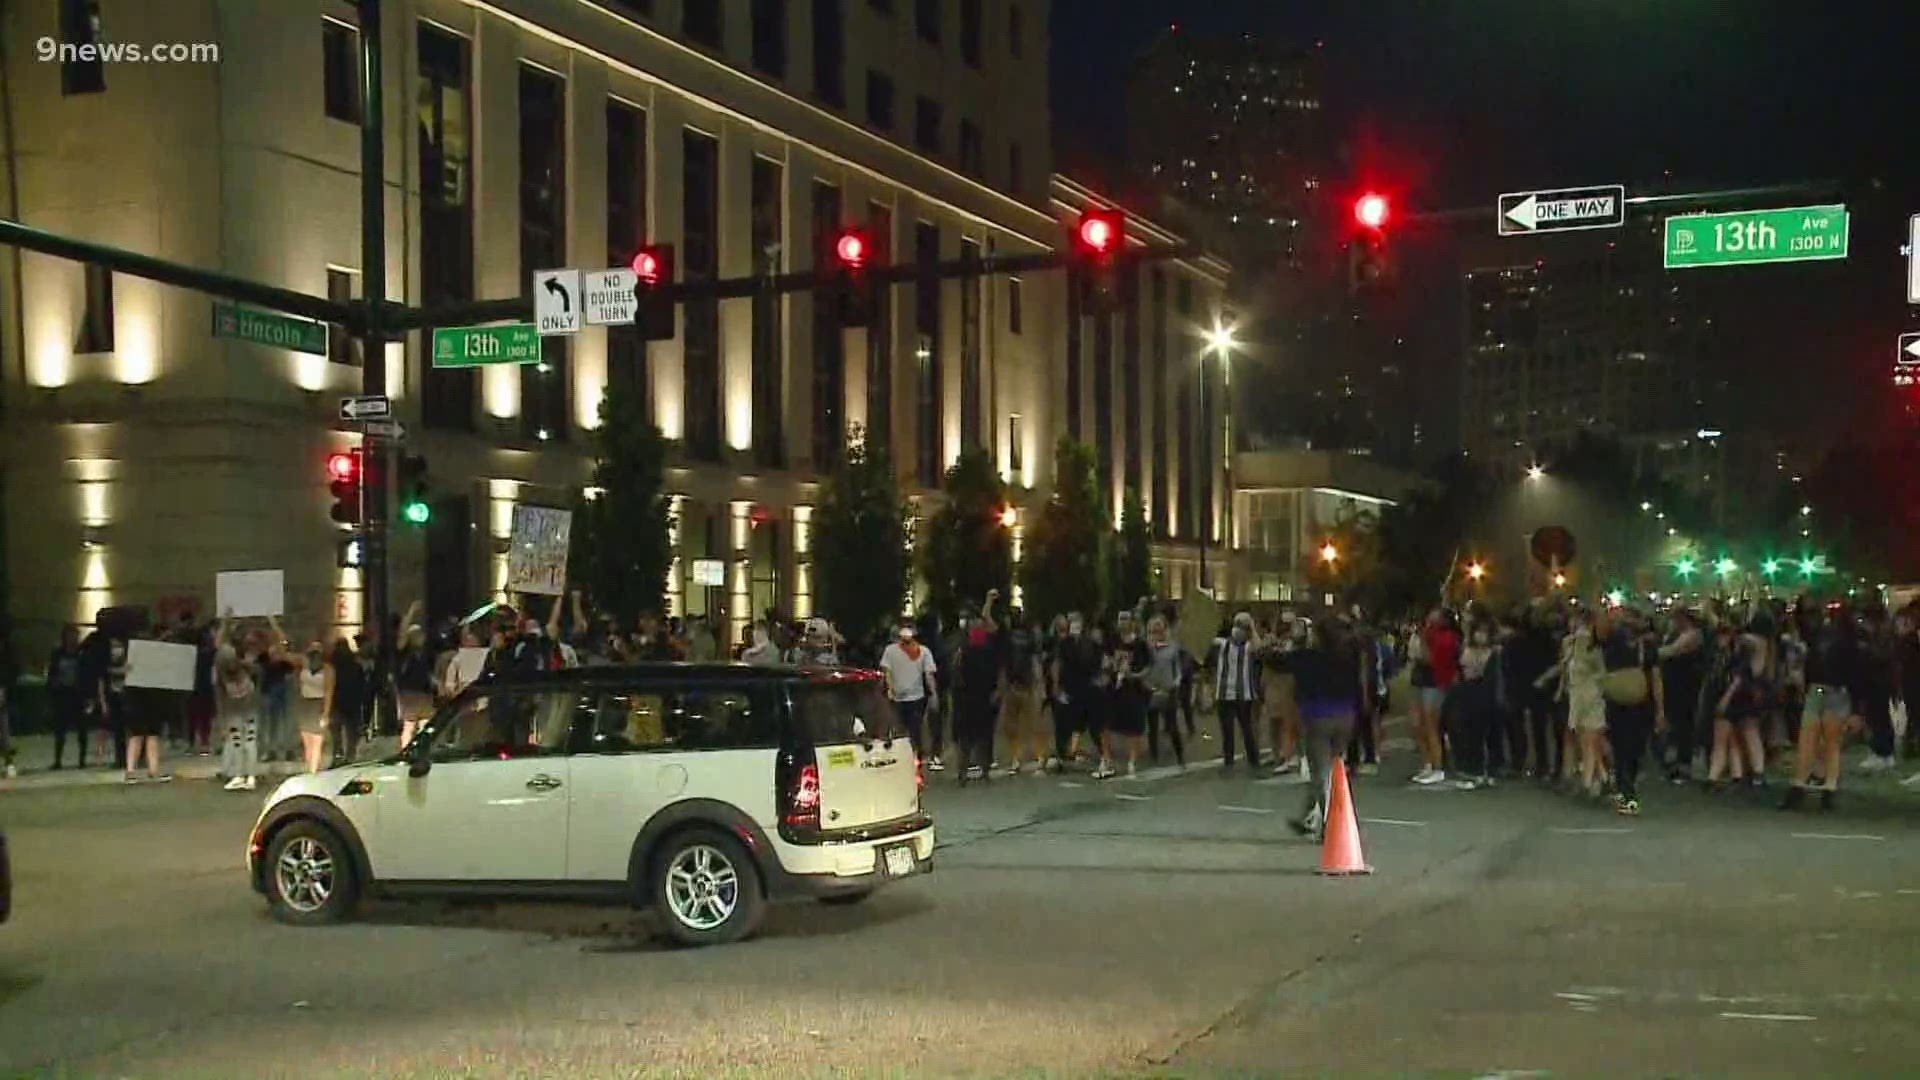 Ryan Haarer was reporting live when a flashbang went off Friday night in downtown. Police used tear gas to clear protesters who had gathered at 13th and Lincoln.